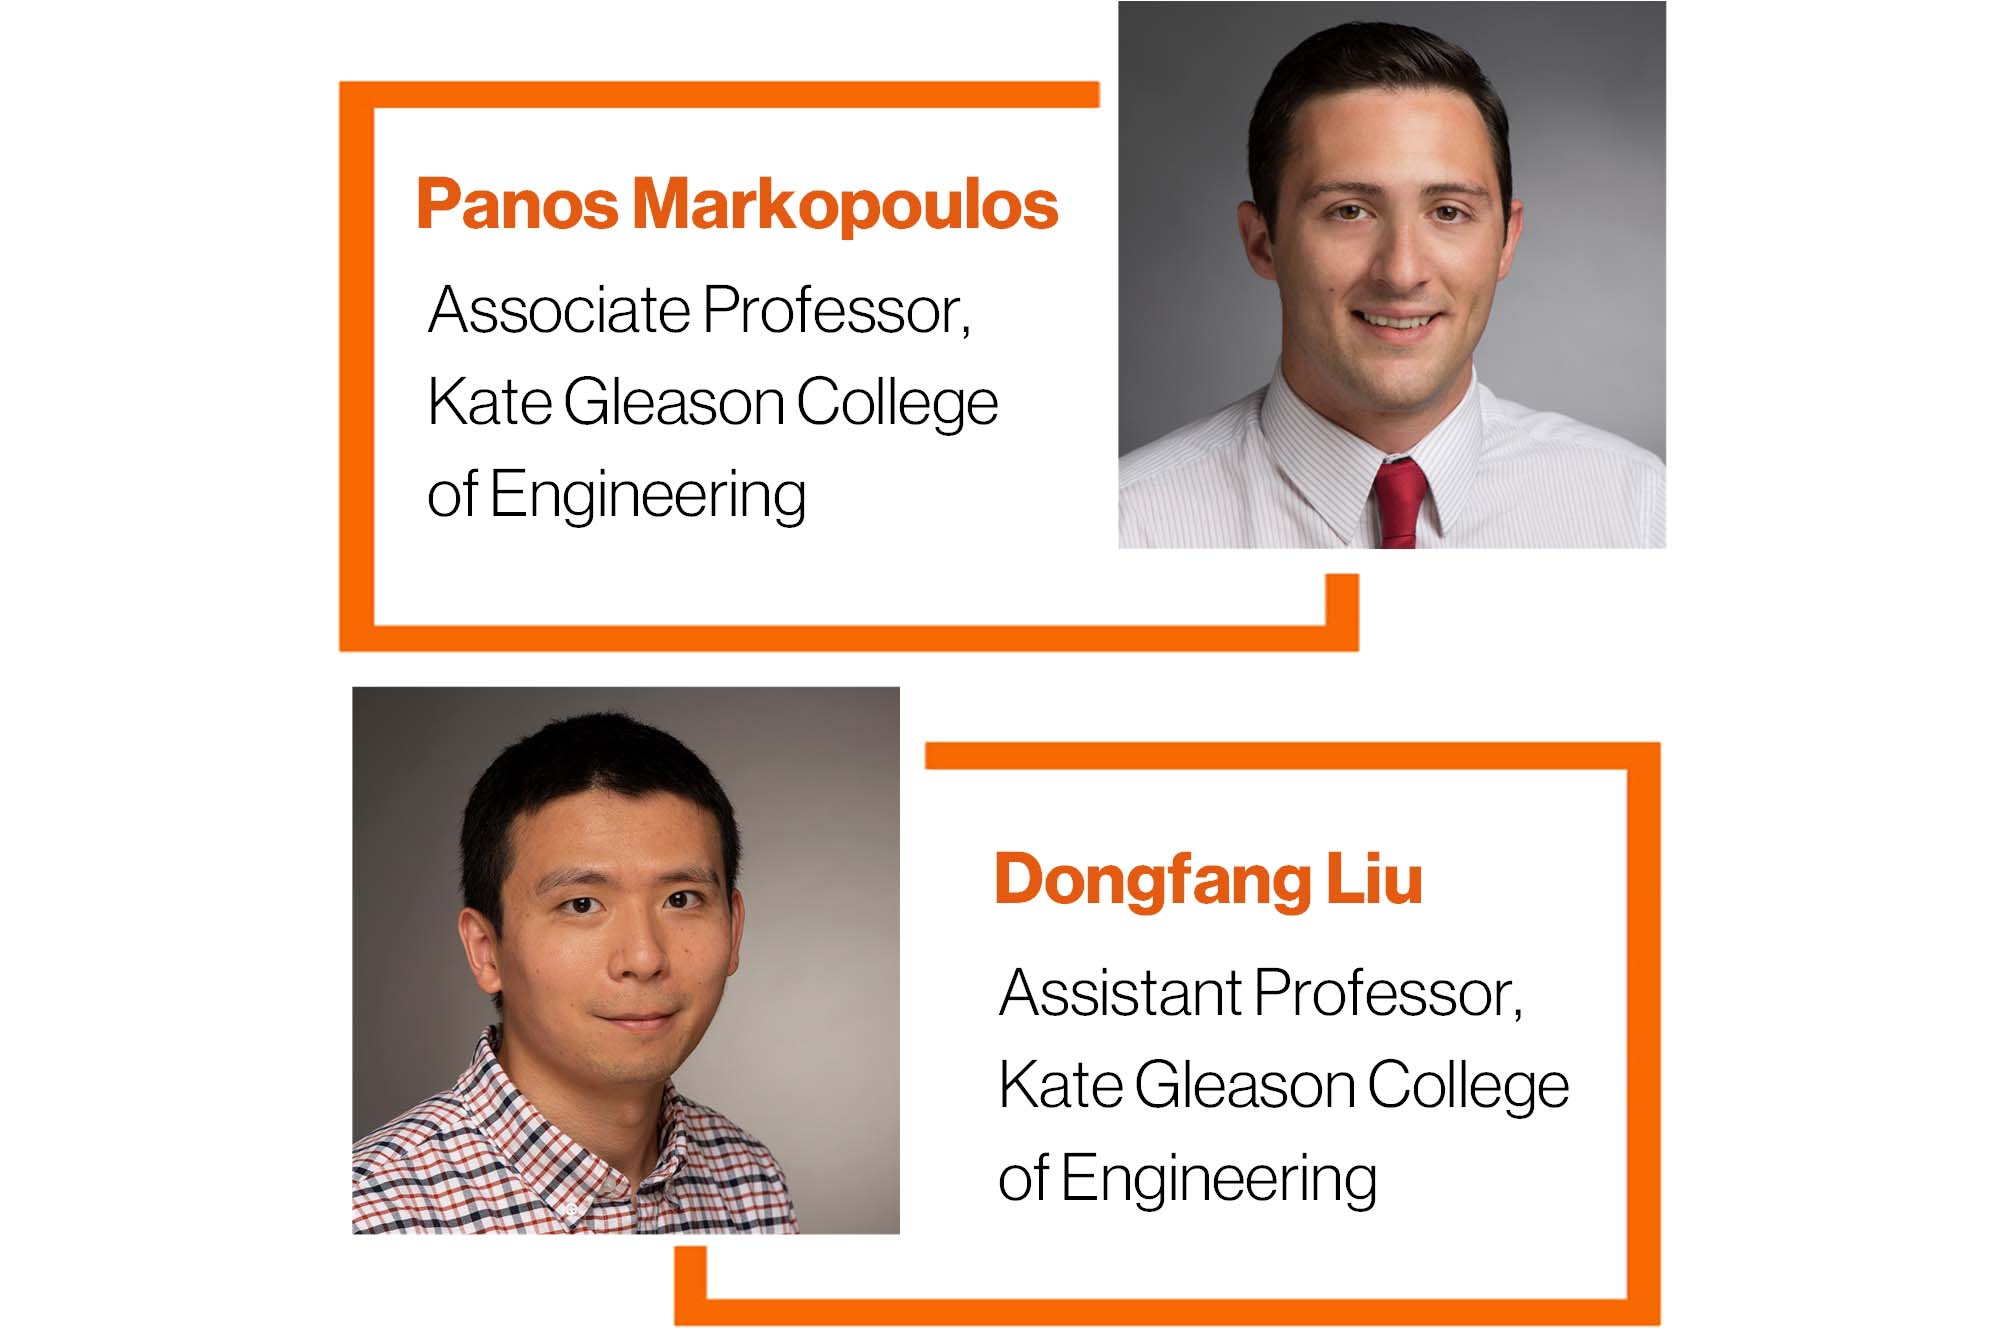 Photos of RIT faculty members, Panos Markopoulos and Dongfang Liu with graphics listing their titles.